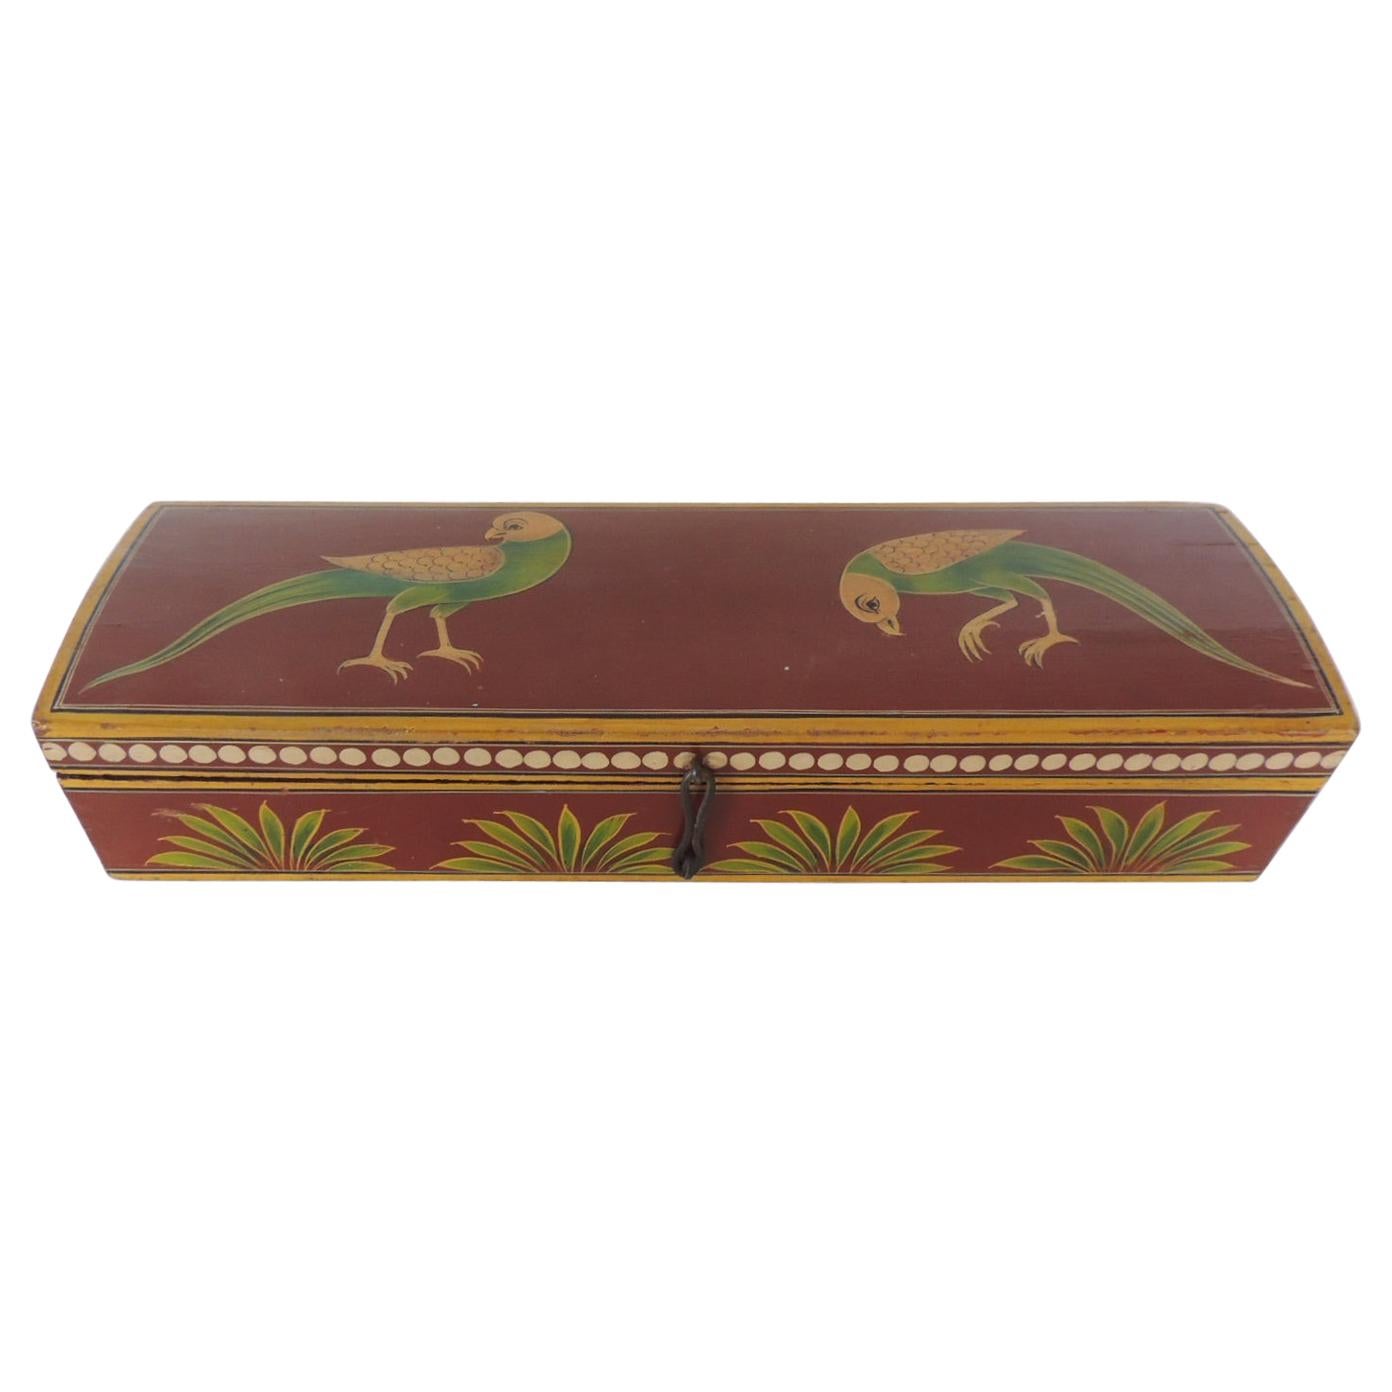 Vintage Lacquered Pen Box Depicting Birds and Palm Trees